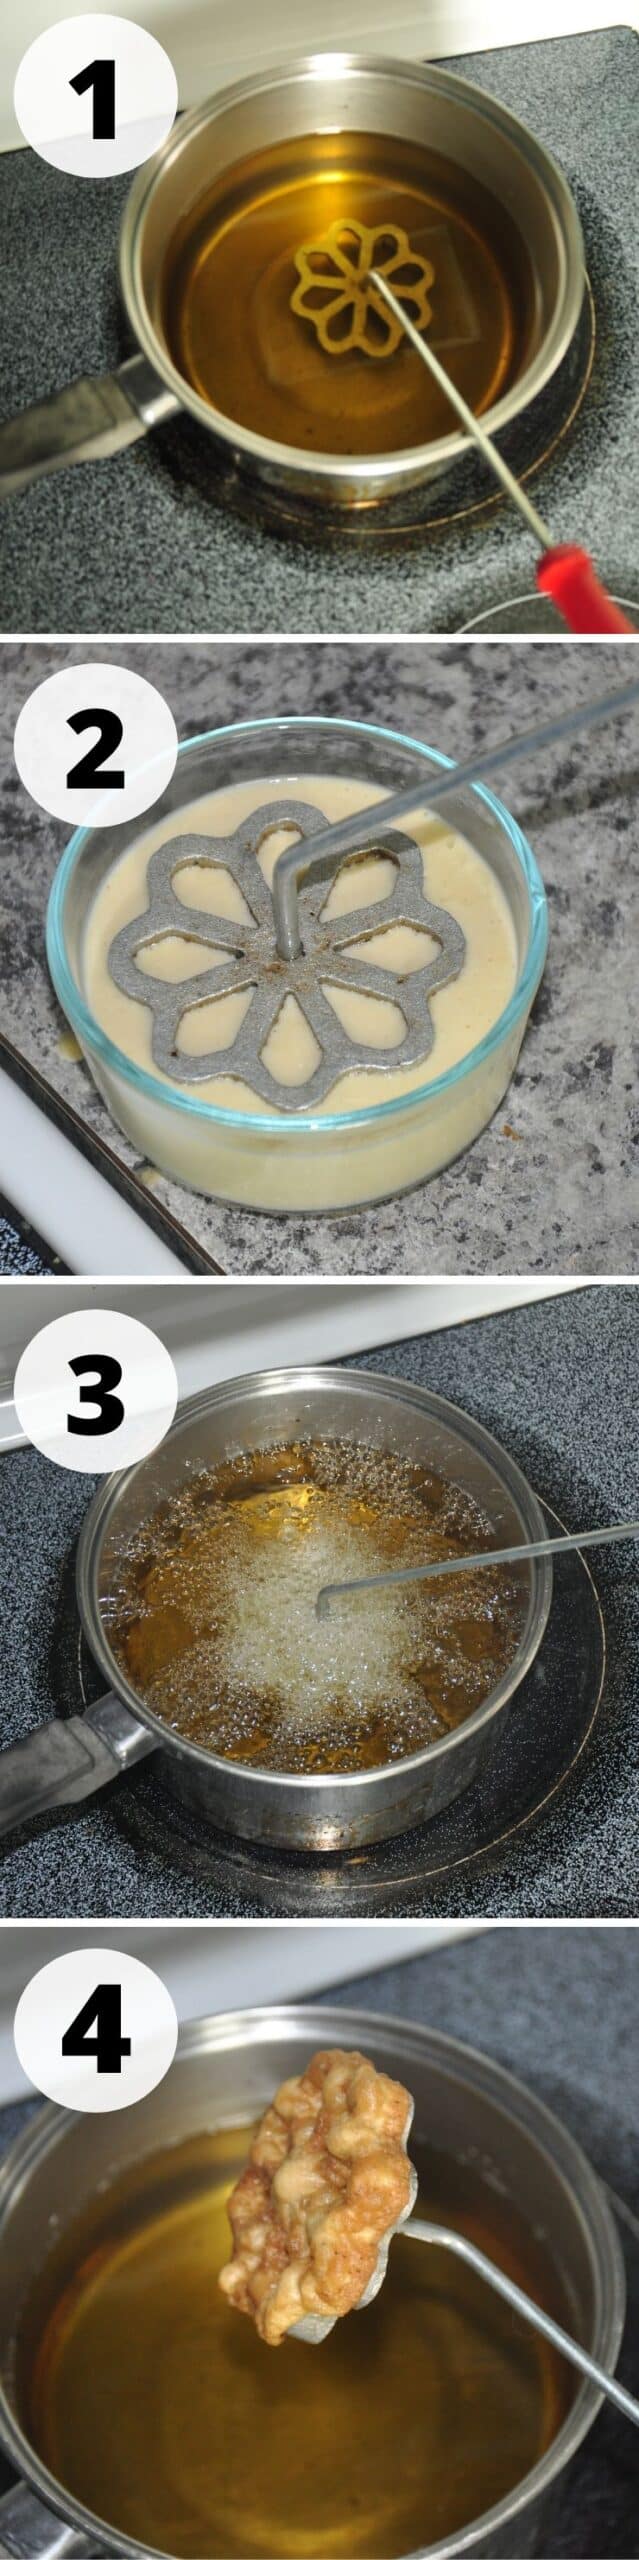 Rosette Cookie Frying Process Pictures 1-4.